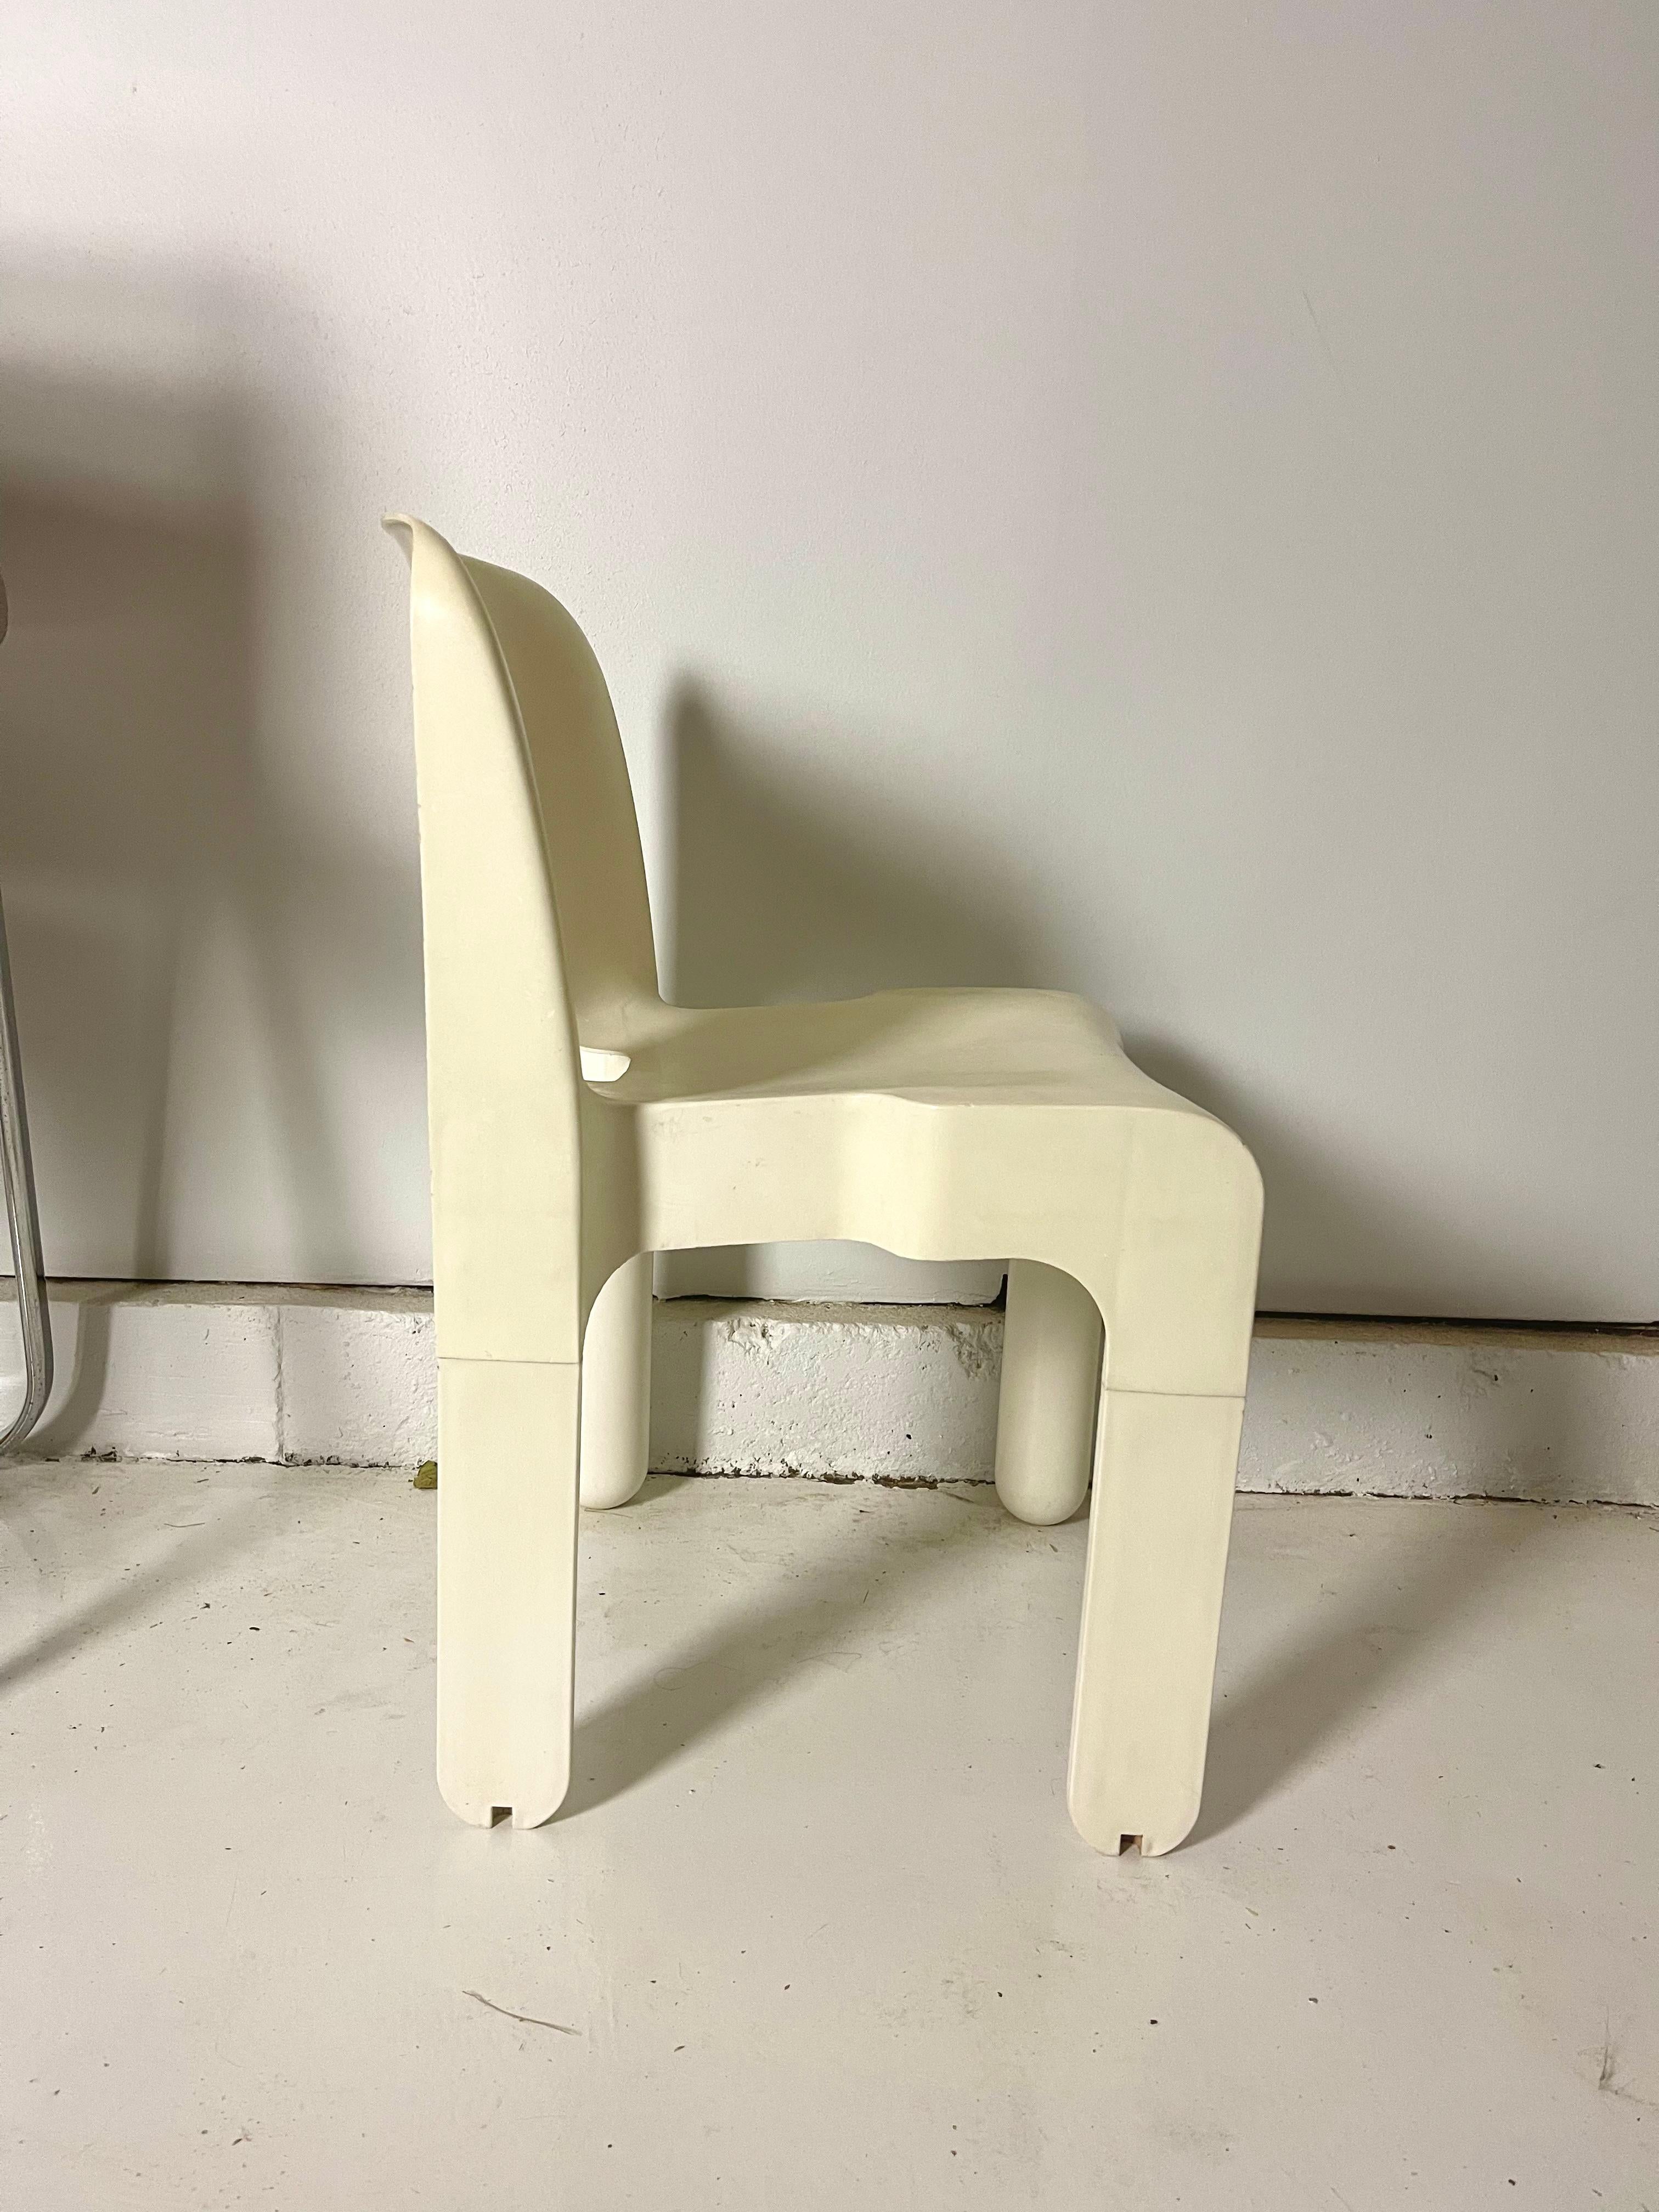 Universale chair by legendary designer Joe Colombo. First adult-sized plastic chair to be produced using a single injection cast mold. ABS plastic with detachable legs.